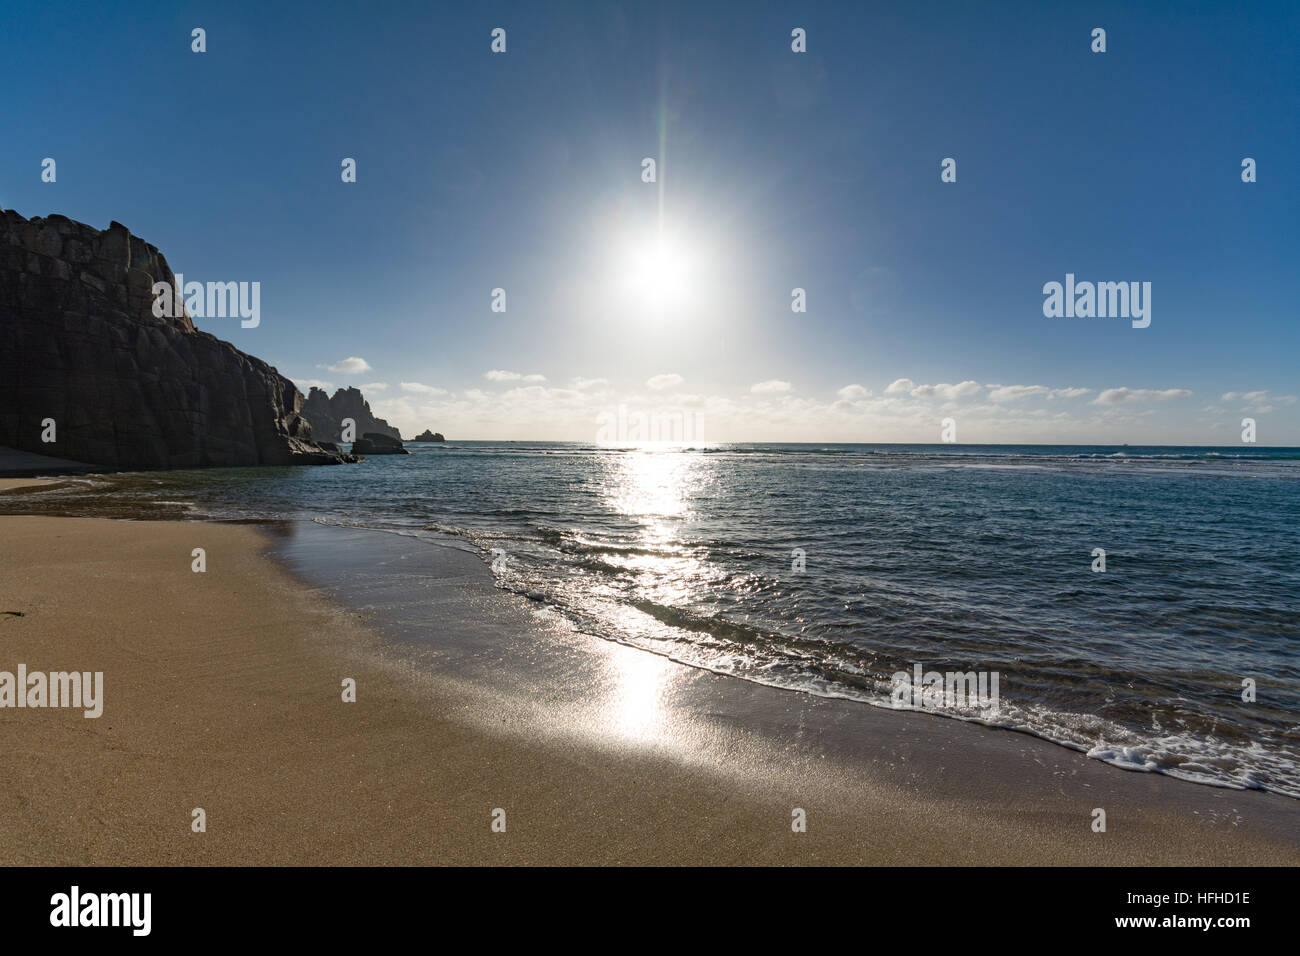 Treen, Cornwall, UK. 2nd Jan, 2017. UK Weather. Sheletered from the cold northerly winds it was hot and sunny enough for people to be sunbathing and swimming in the sea today at Treen, near Porthcurno. © cwallpix/Alamy Live News Stock Photo